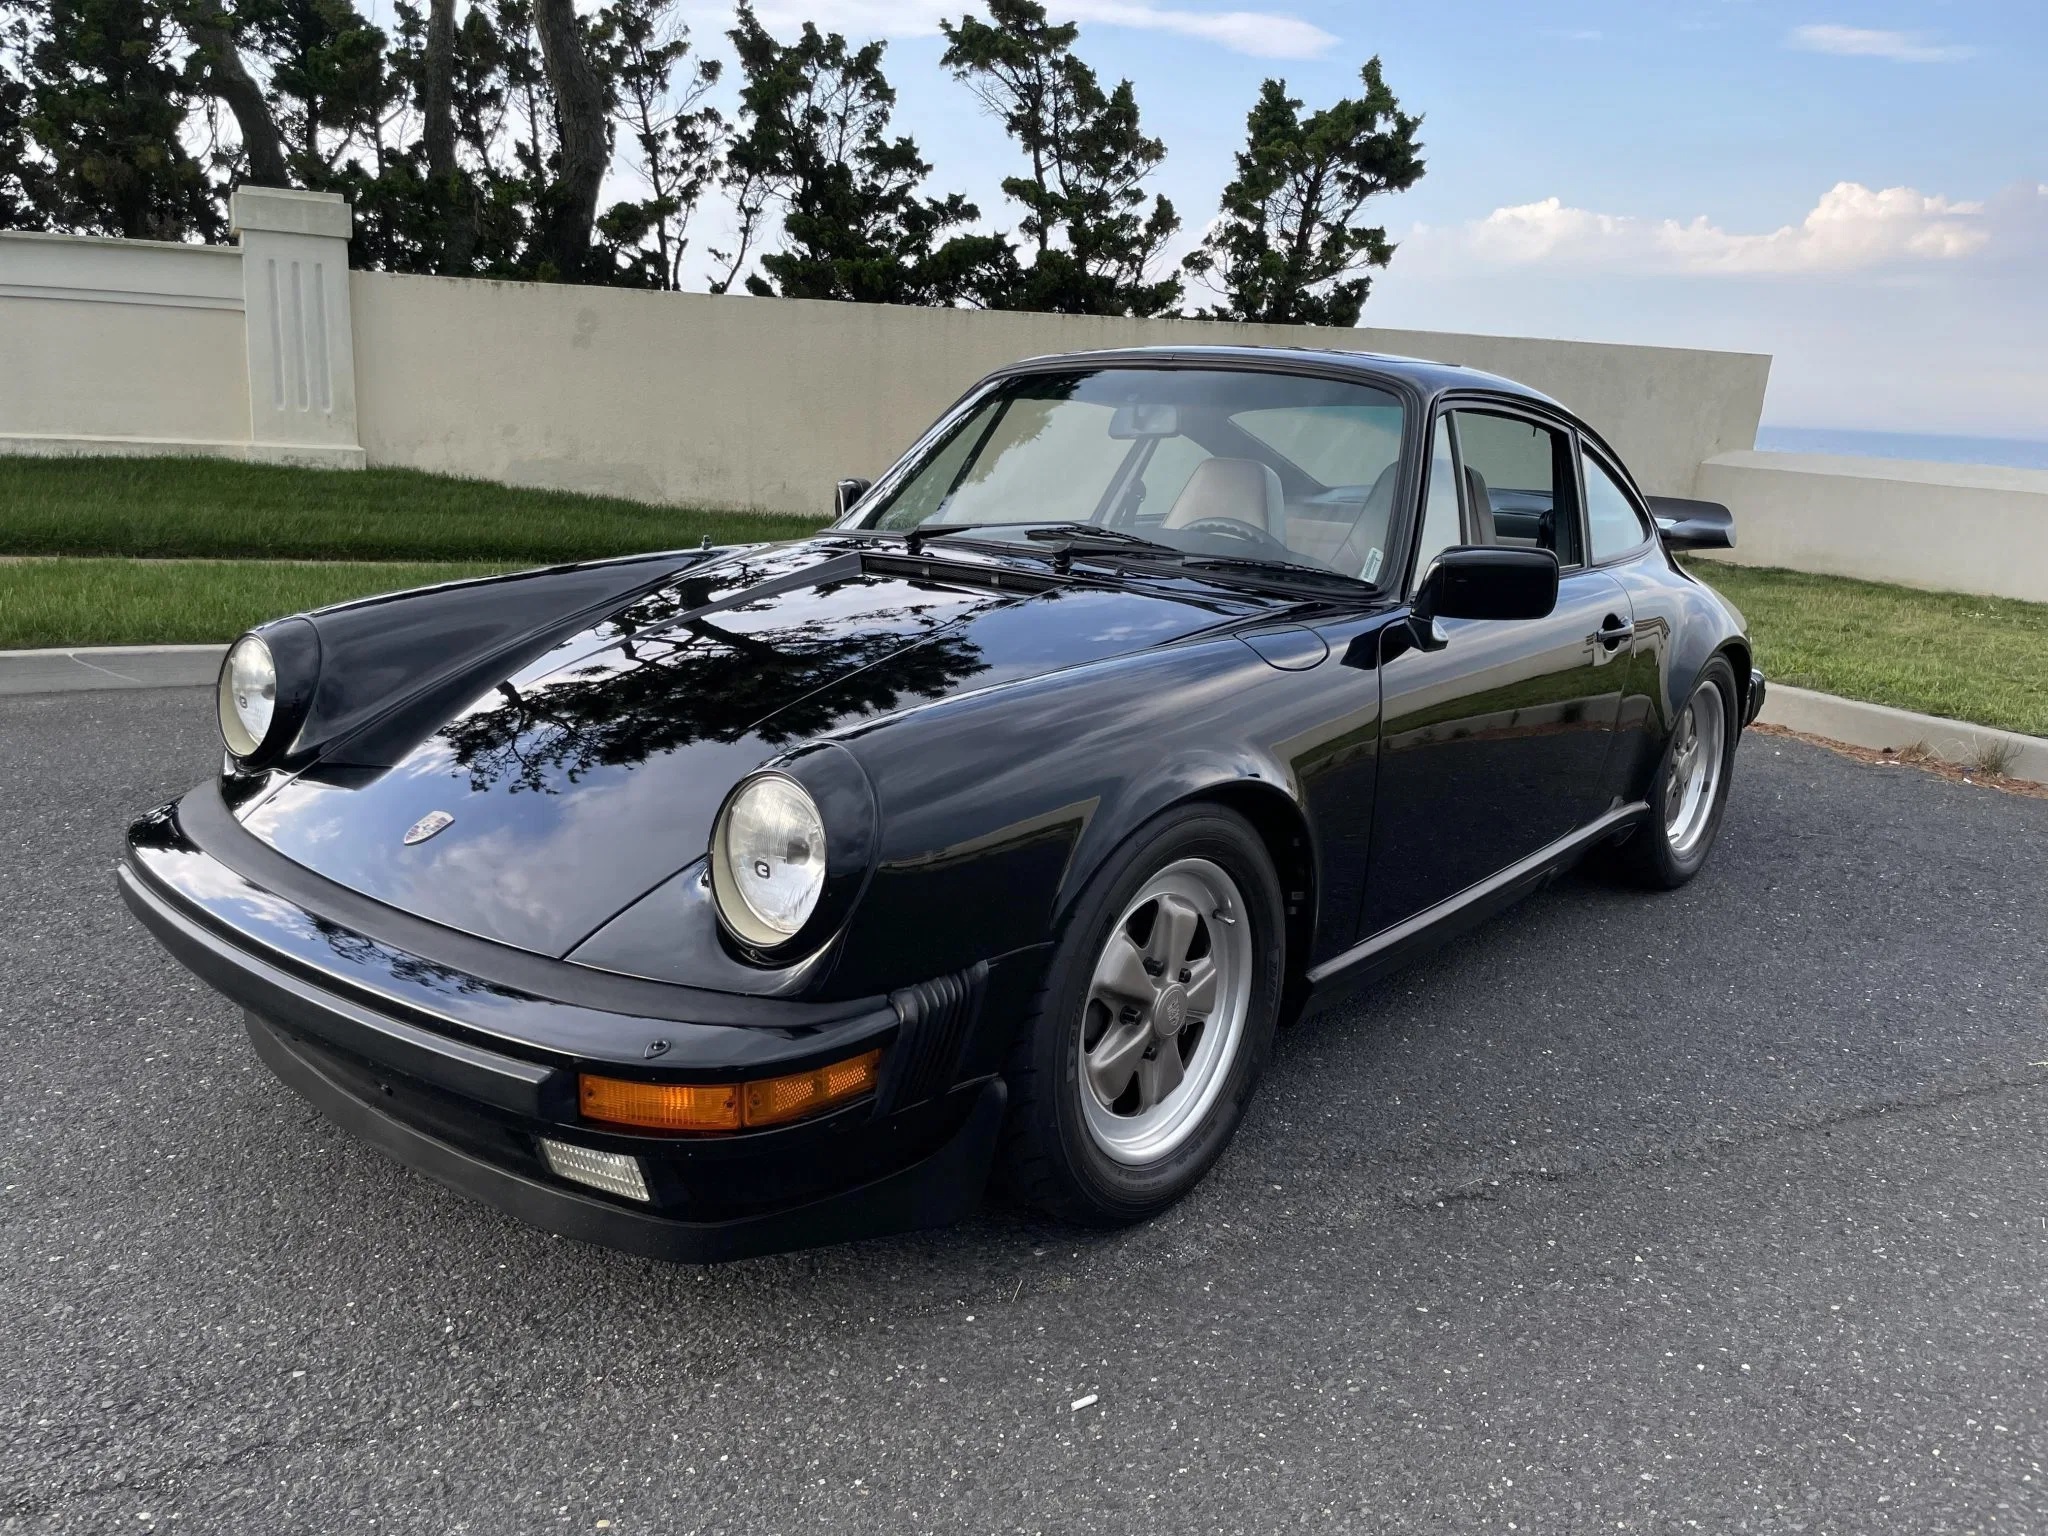 The front 3/4 view of a black 1984 Porsche 911 Carrera 3.2 parked in an oceanside parking lot